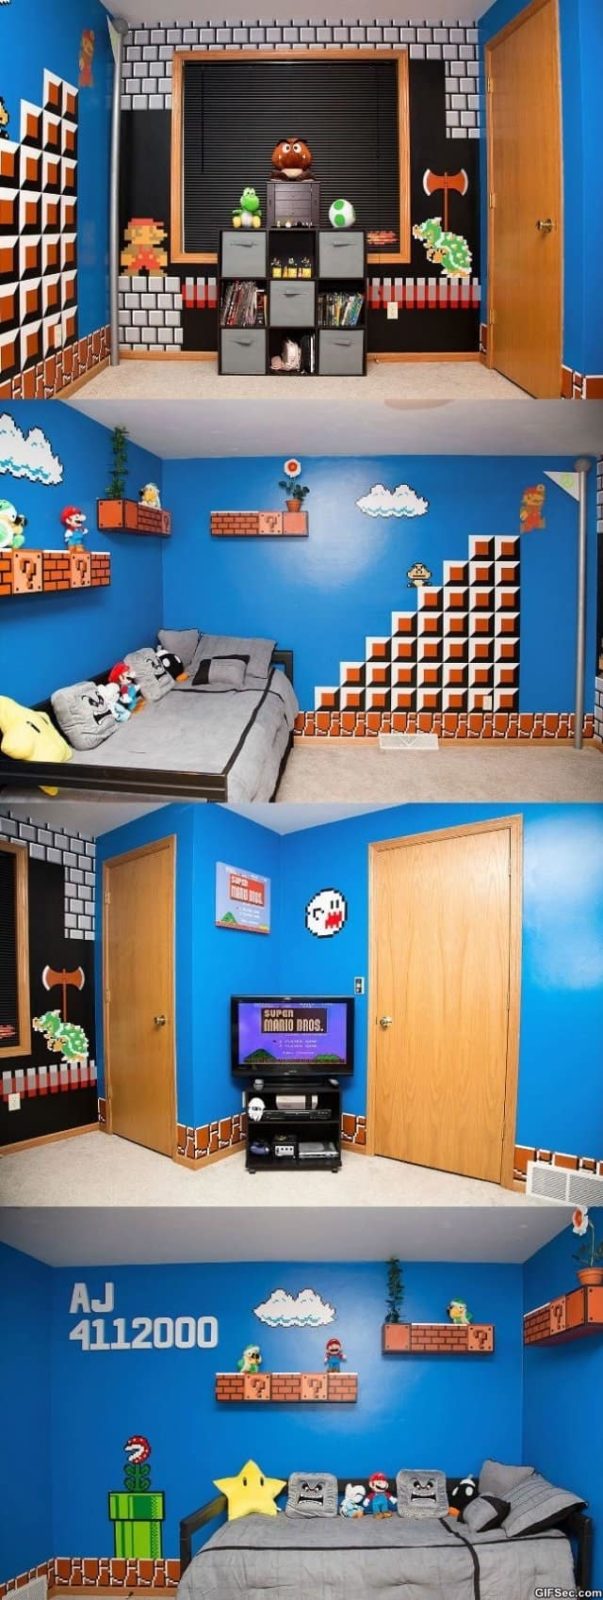 It’s never too geeky to be a hardcore of fan of super mario